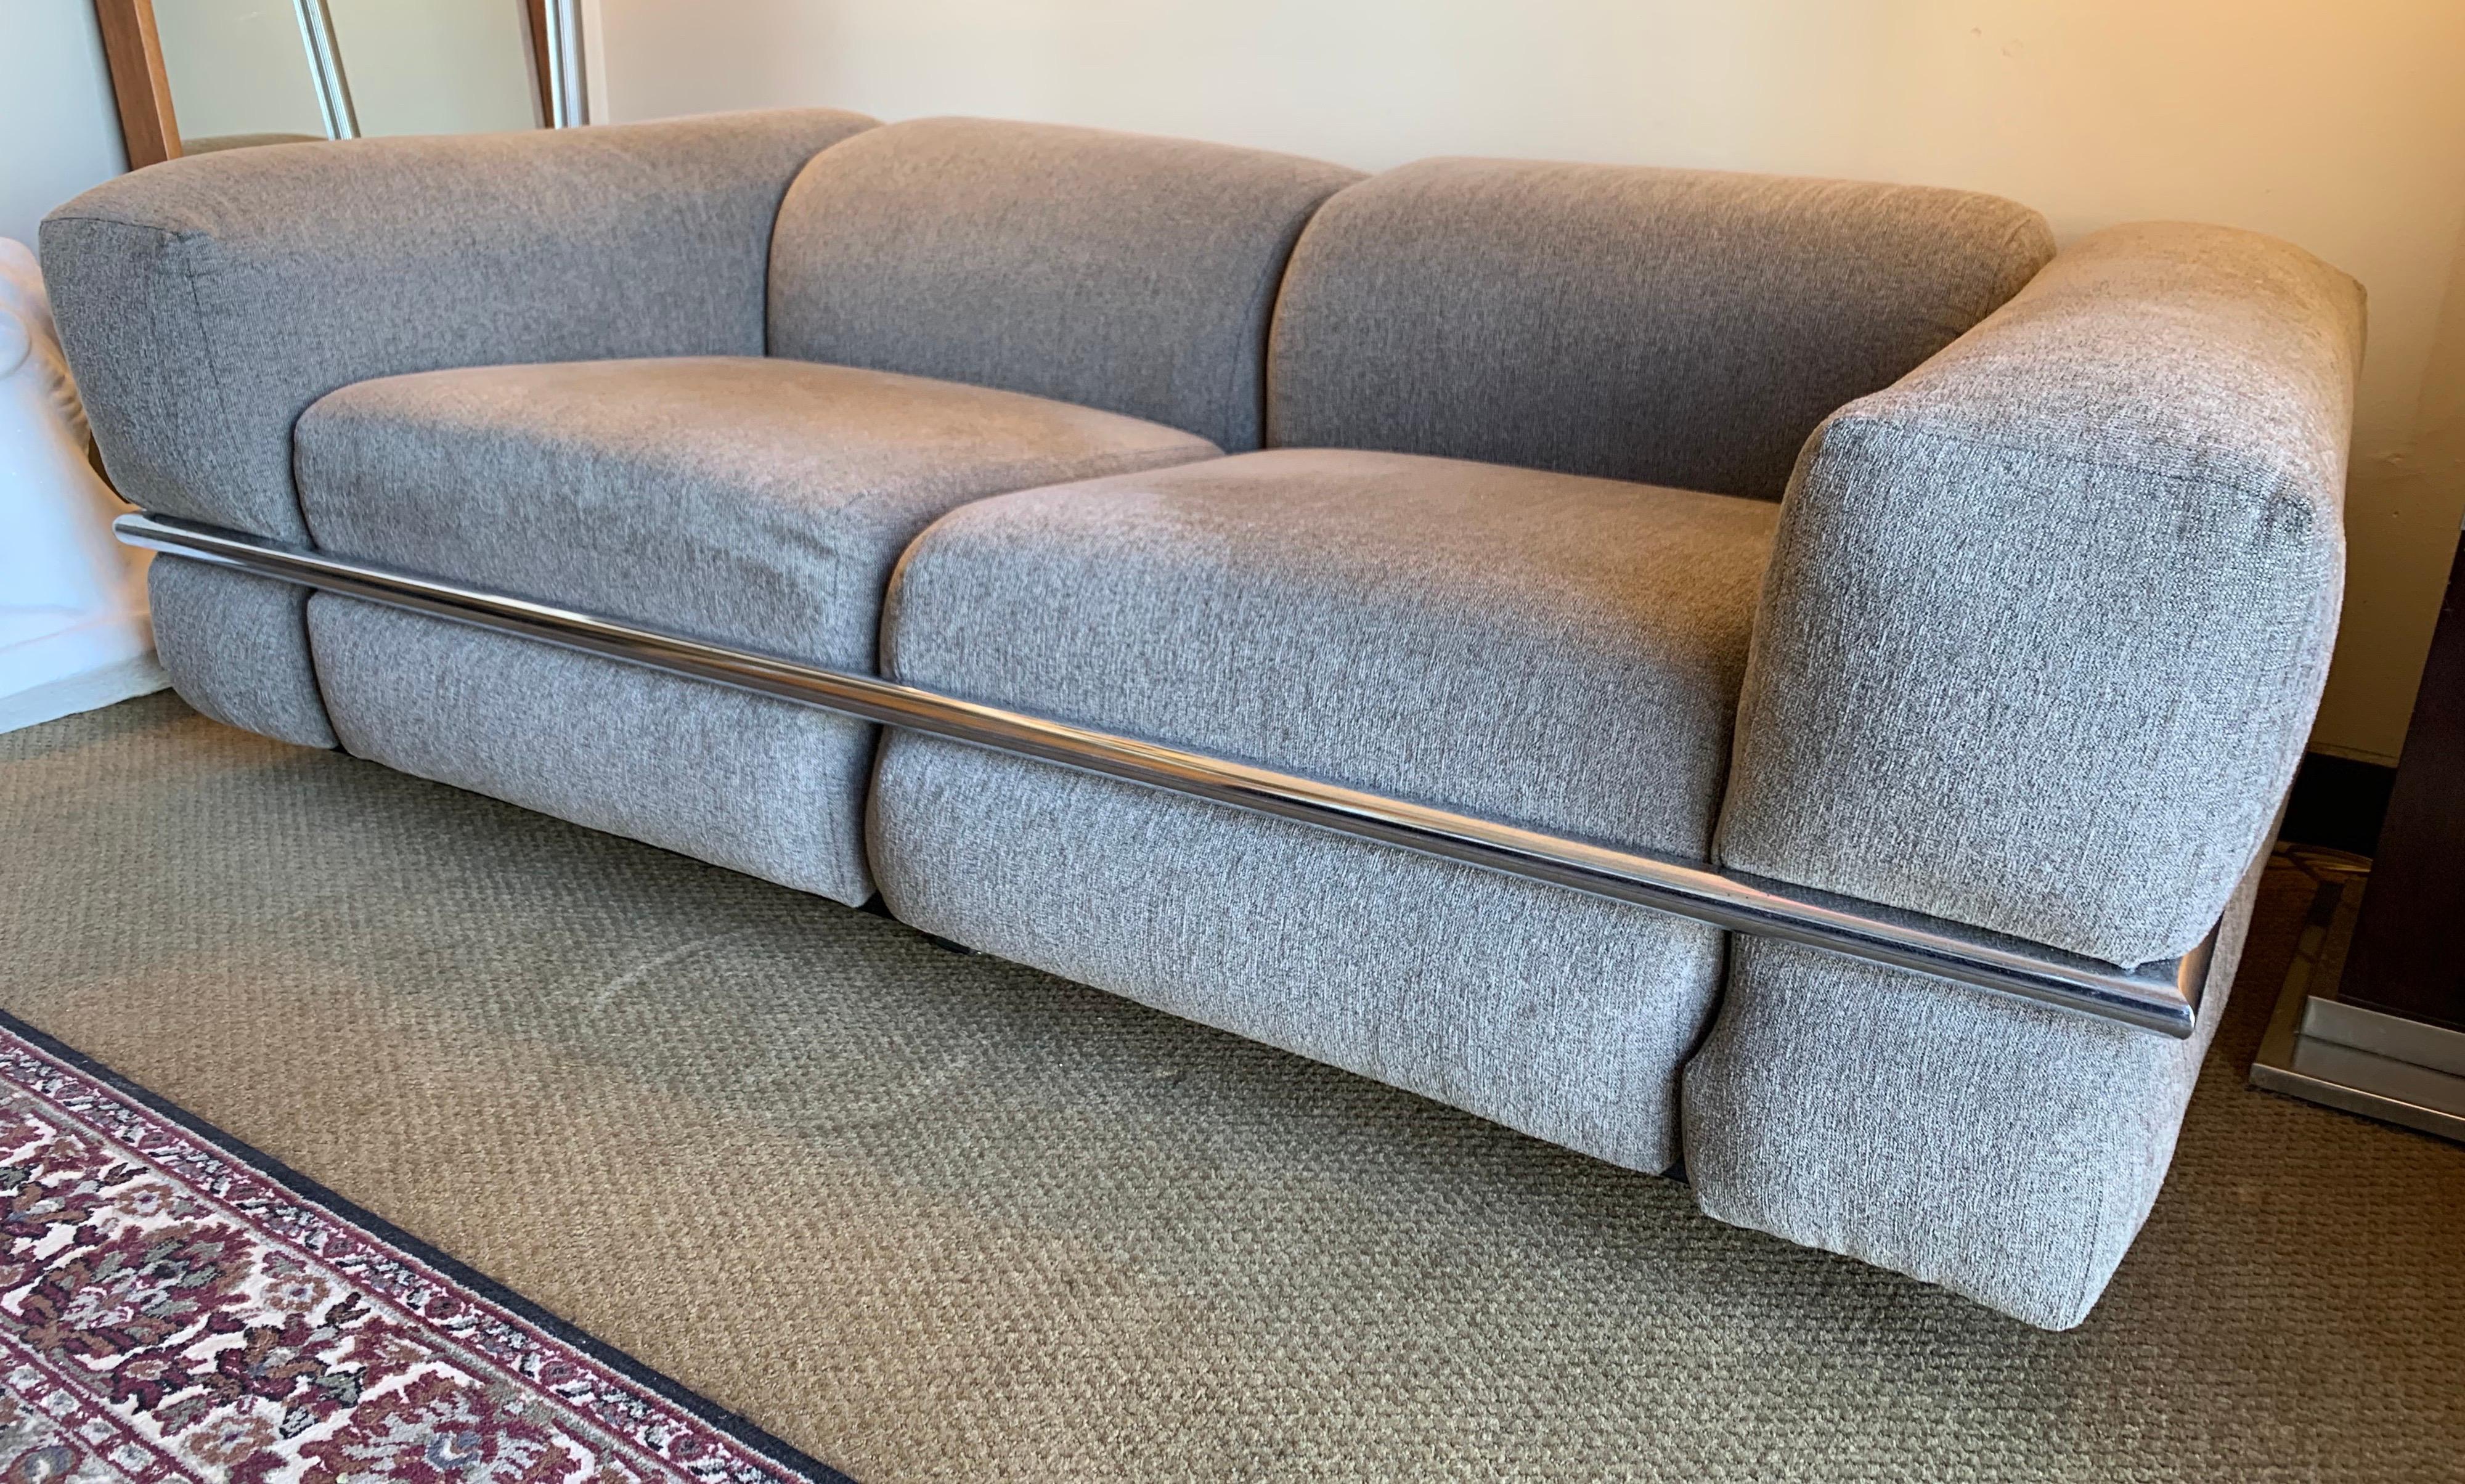 Stunning Cassina Sesann loveseat by Gianfranco Frattini. Designed in 1969 in Italy. The fabric is a solid gray and its signature is the chrome plated steel that runs around the sofa. All original, circa 1970's and still in great shape. The is the